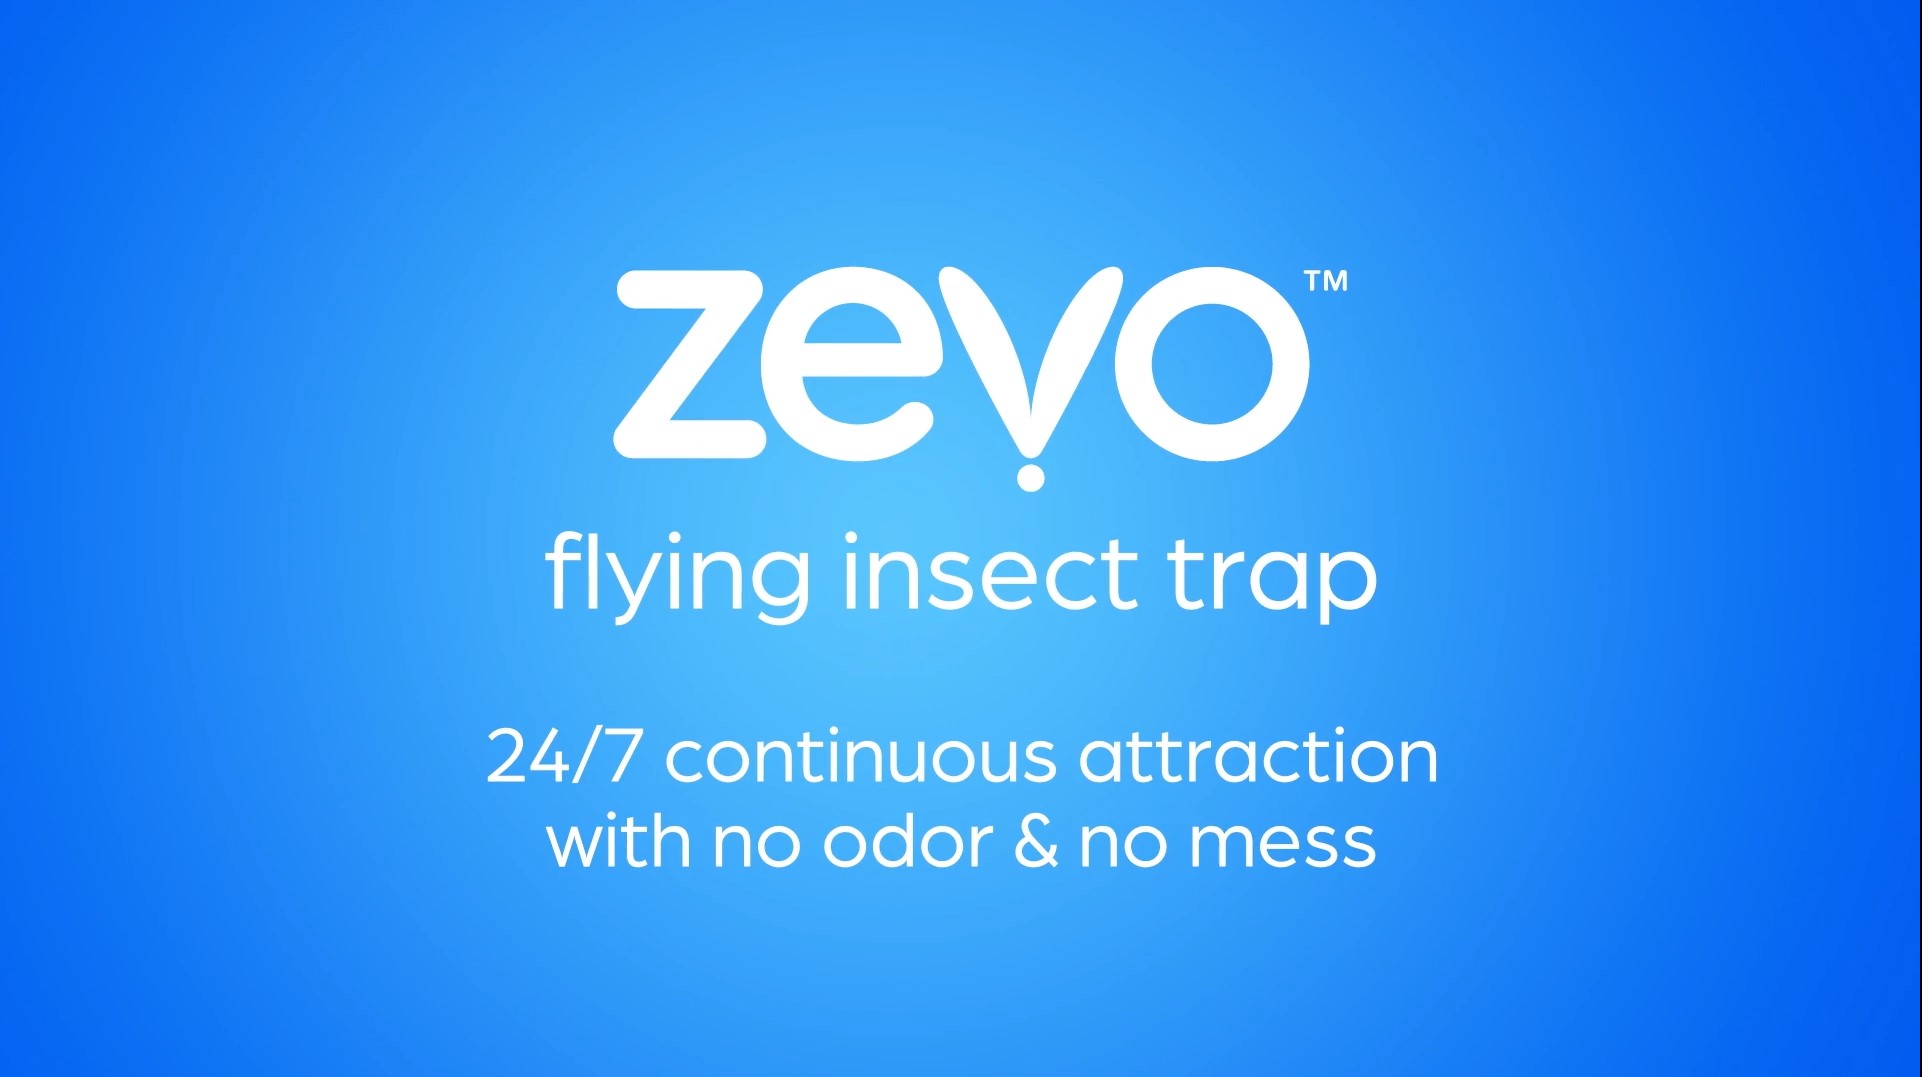 ZEVO Flying Insect Trap, “Unboxed”